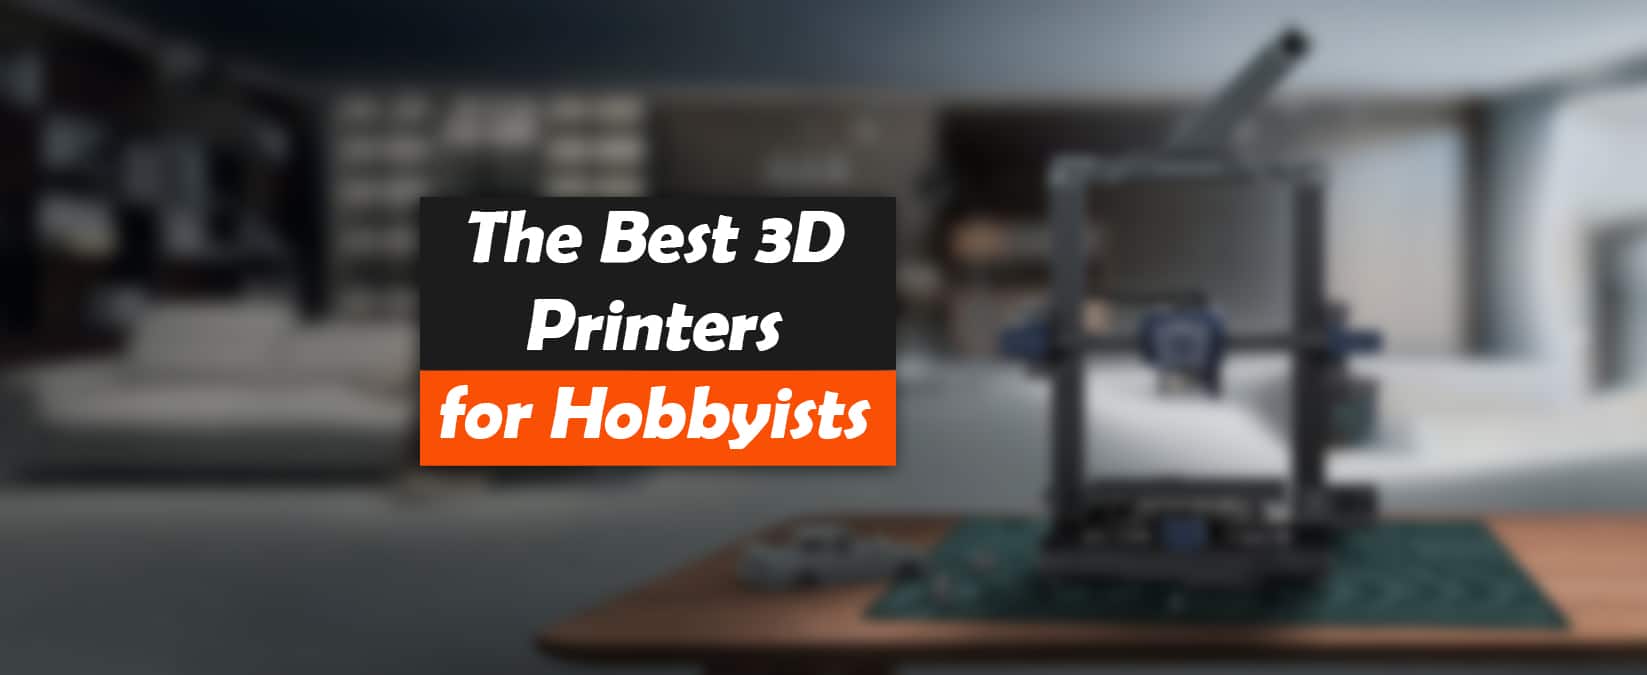 The Best 3D Printers for Hobbyists Professionals